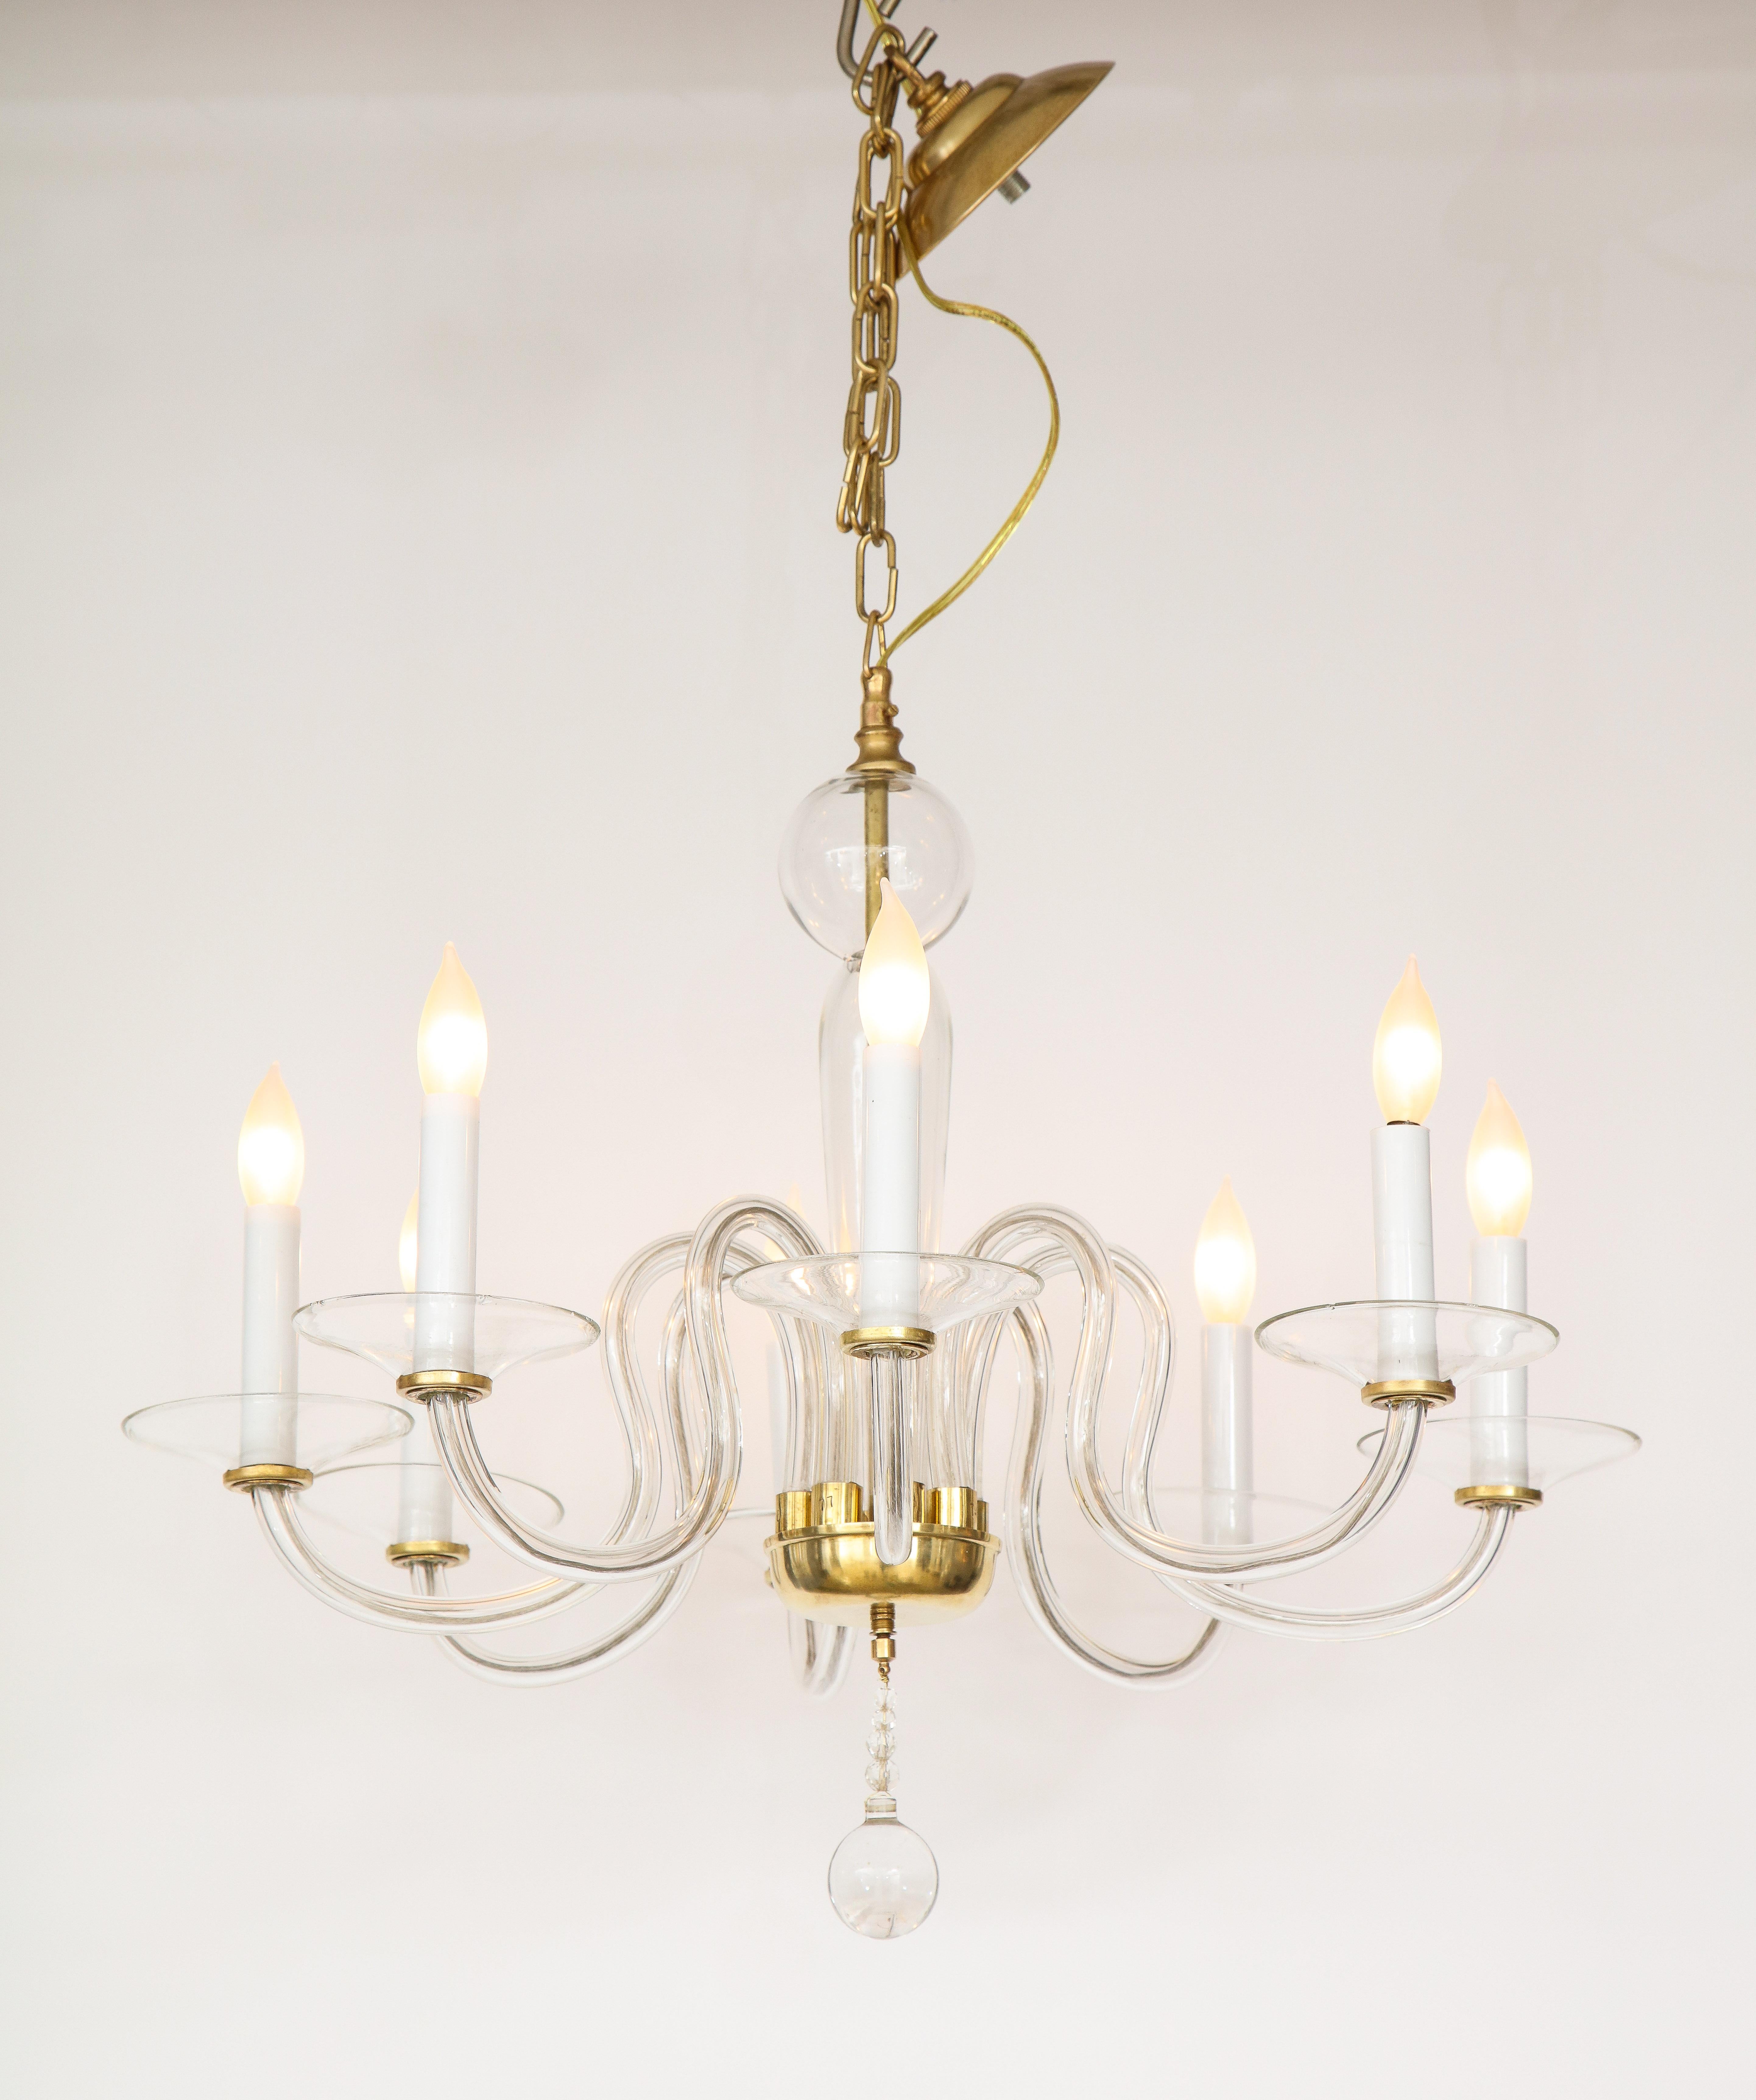 A Murano Mid-Century Modern hand blown glass chandelier with eight arms with brass supported bobeche, stem and base canopy with a graduated glass ball finials. The eight arms are elegantly curved and evoke a sleek modernist aesthetic. Re-wired for